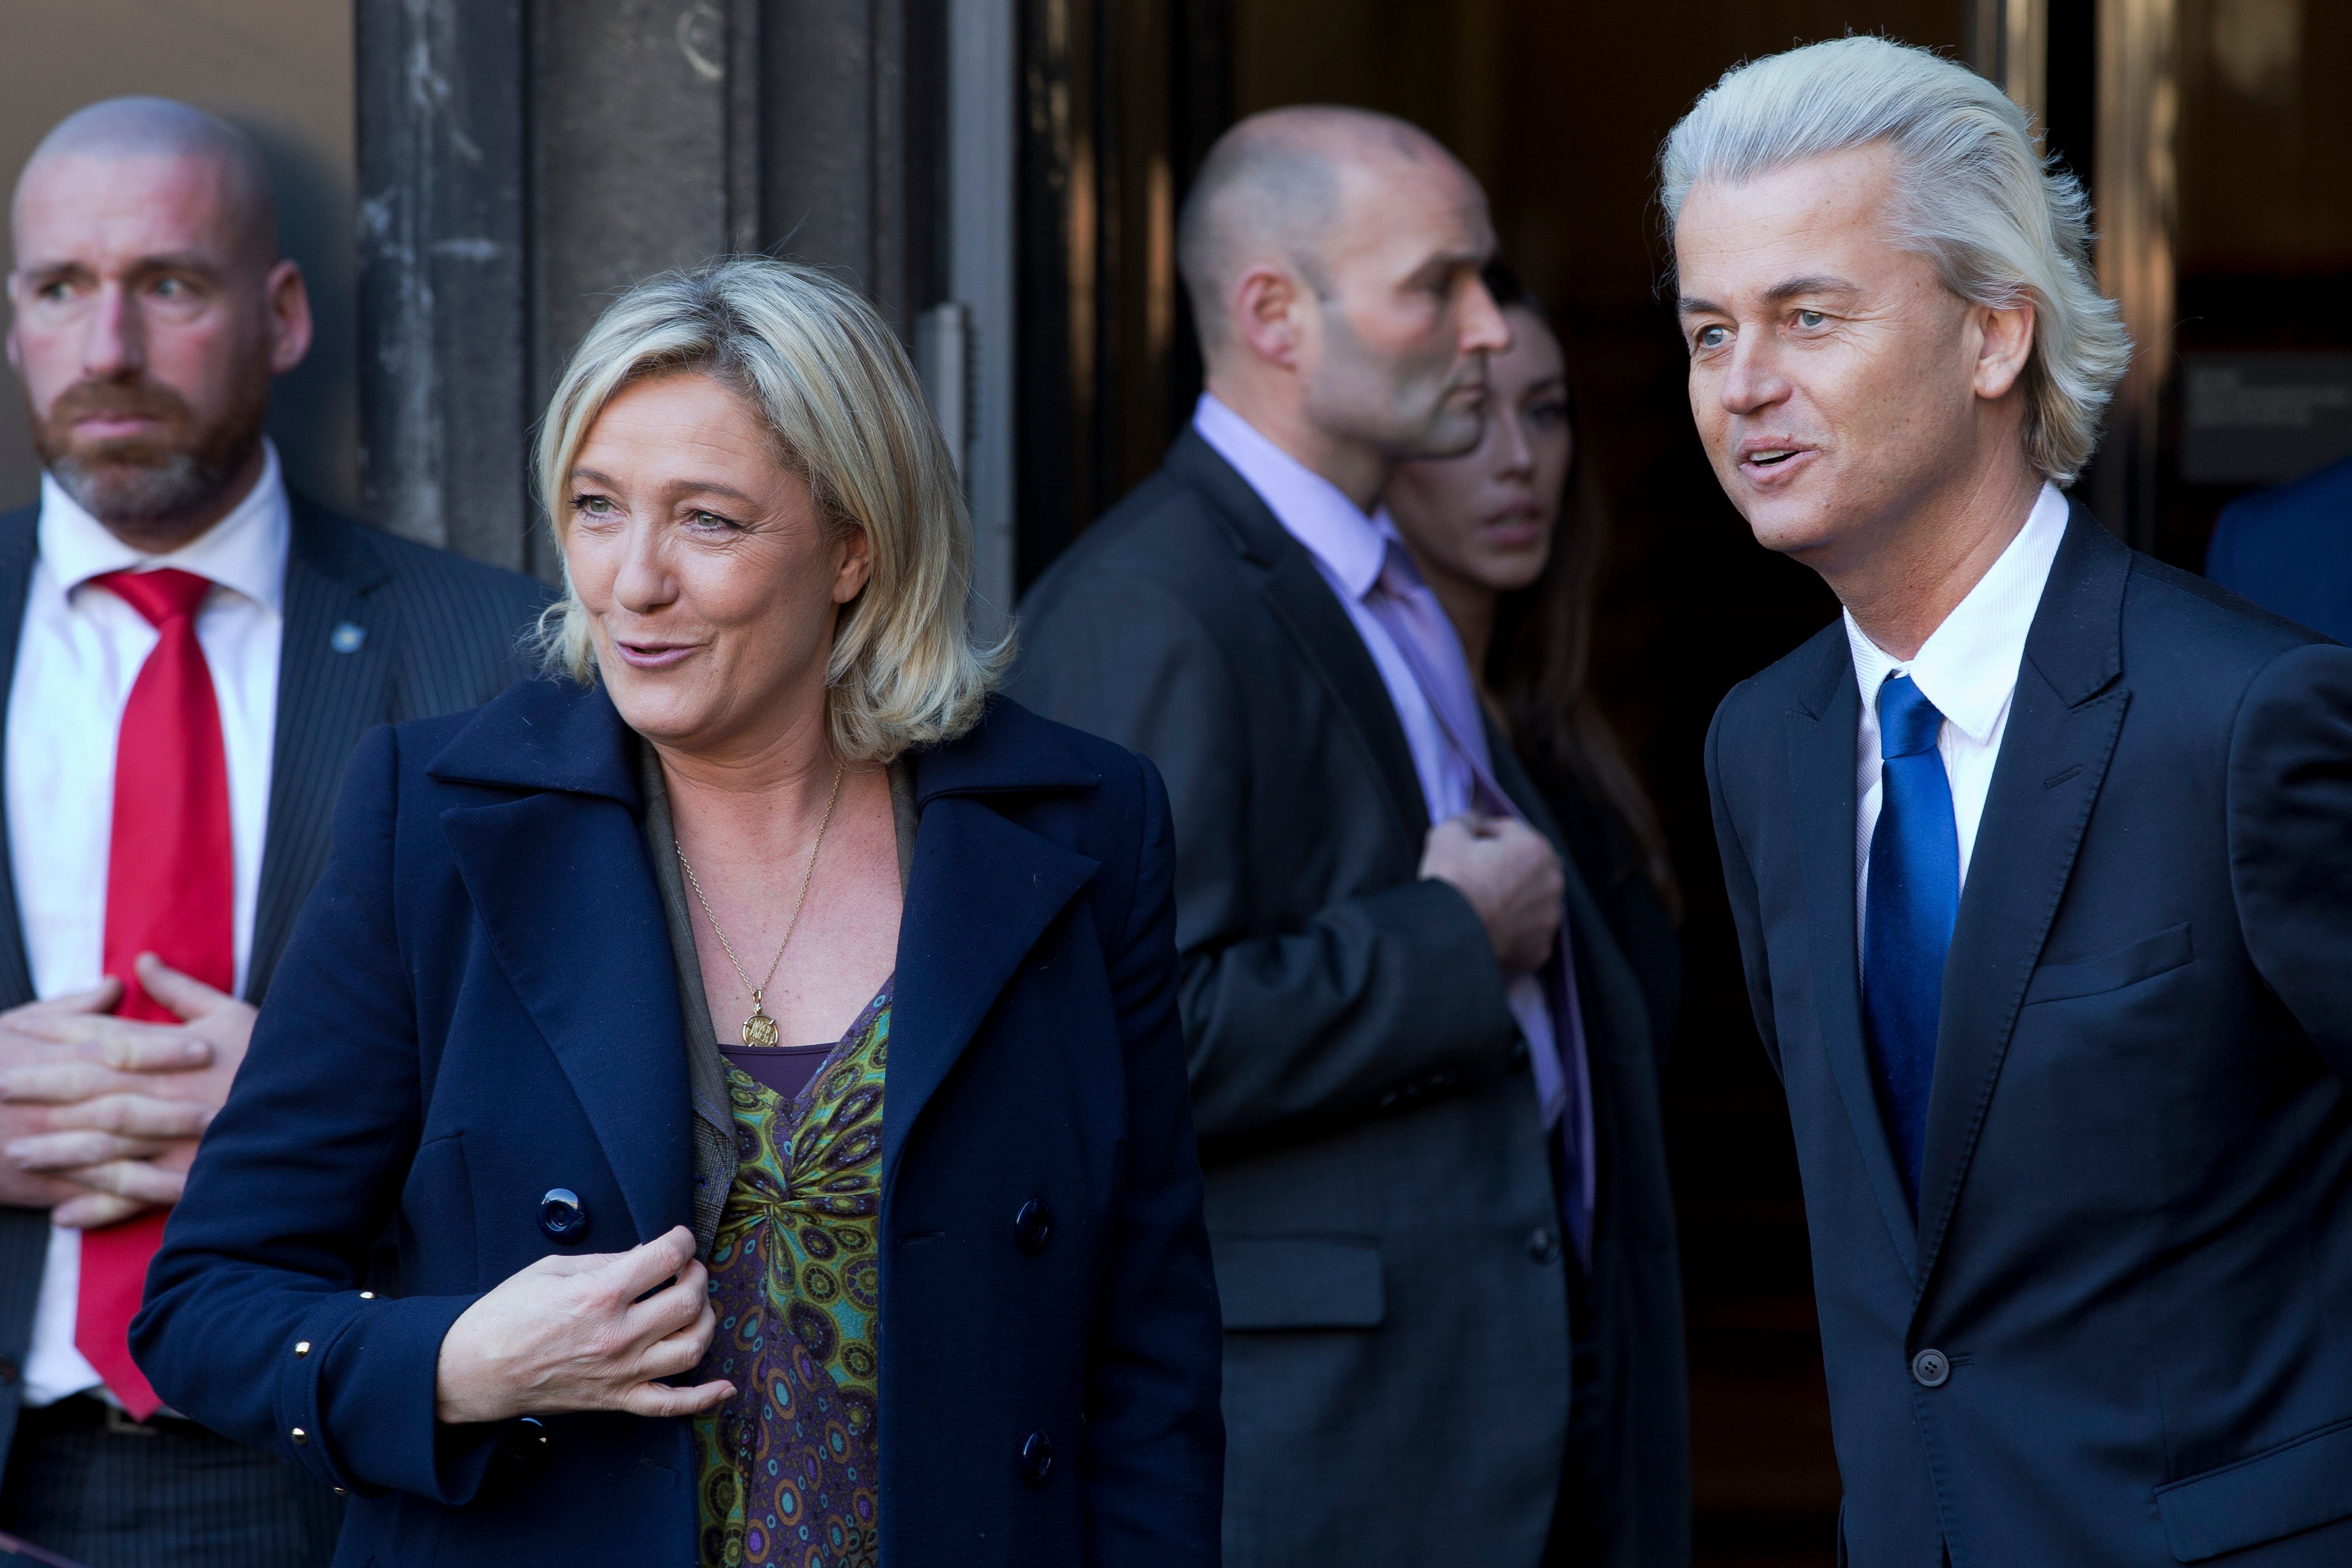 European right-wing politicians, Dutchman Geert Wilders, right, and France's Marine Le Pen, left